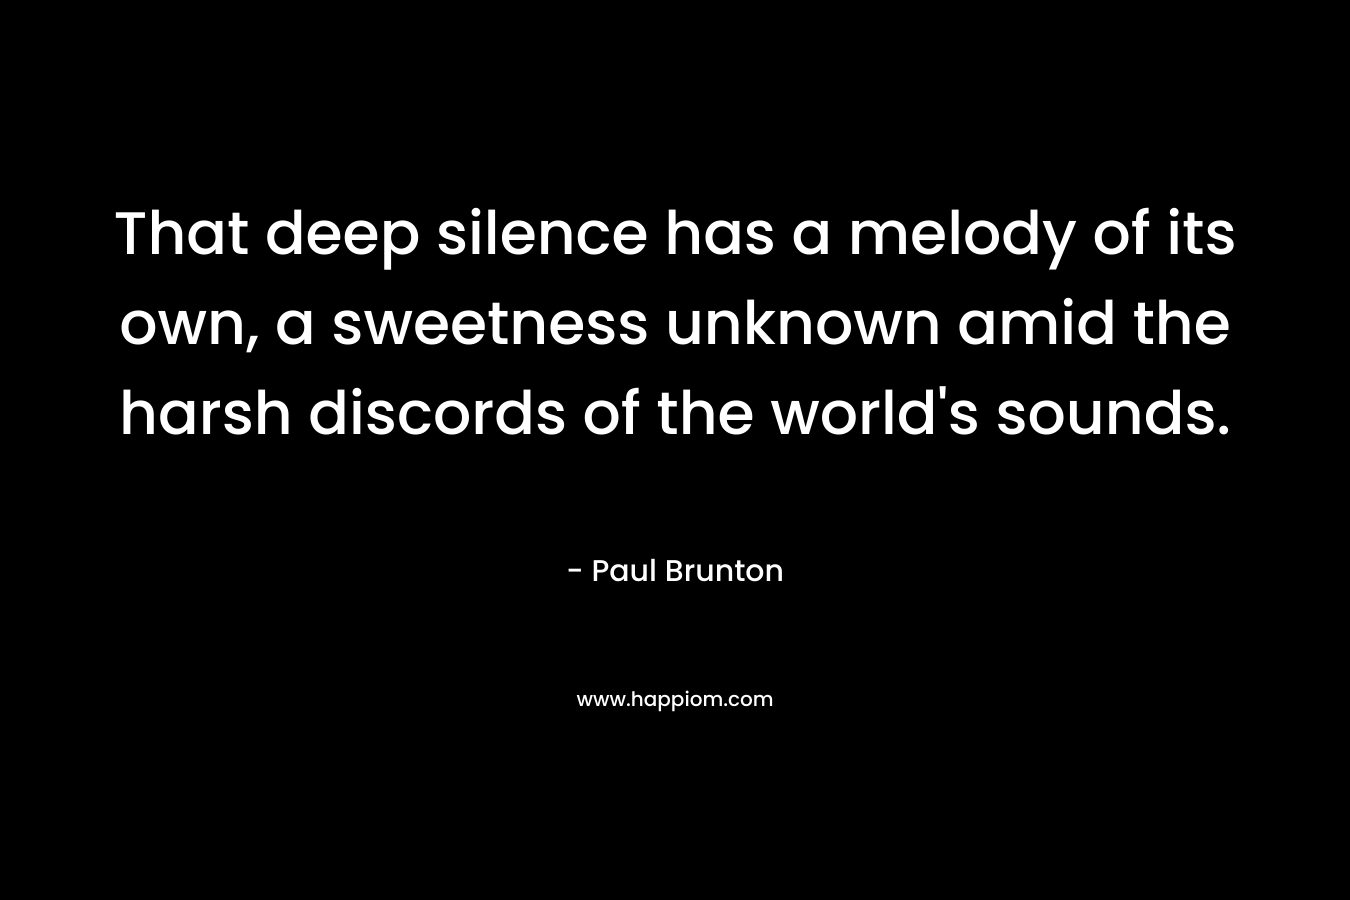 That deep silence has a melody of its own, a sweetness unknown amid the harsh discords of the world’s sounds. – Paul Brunton